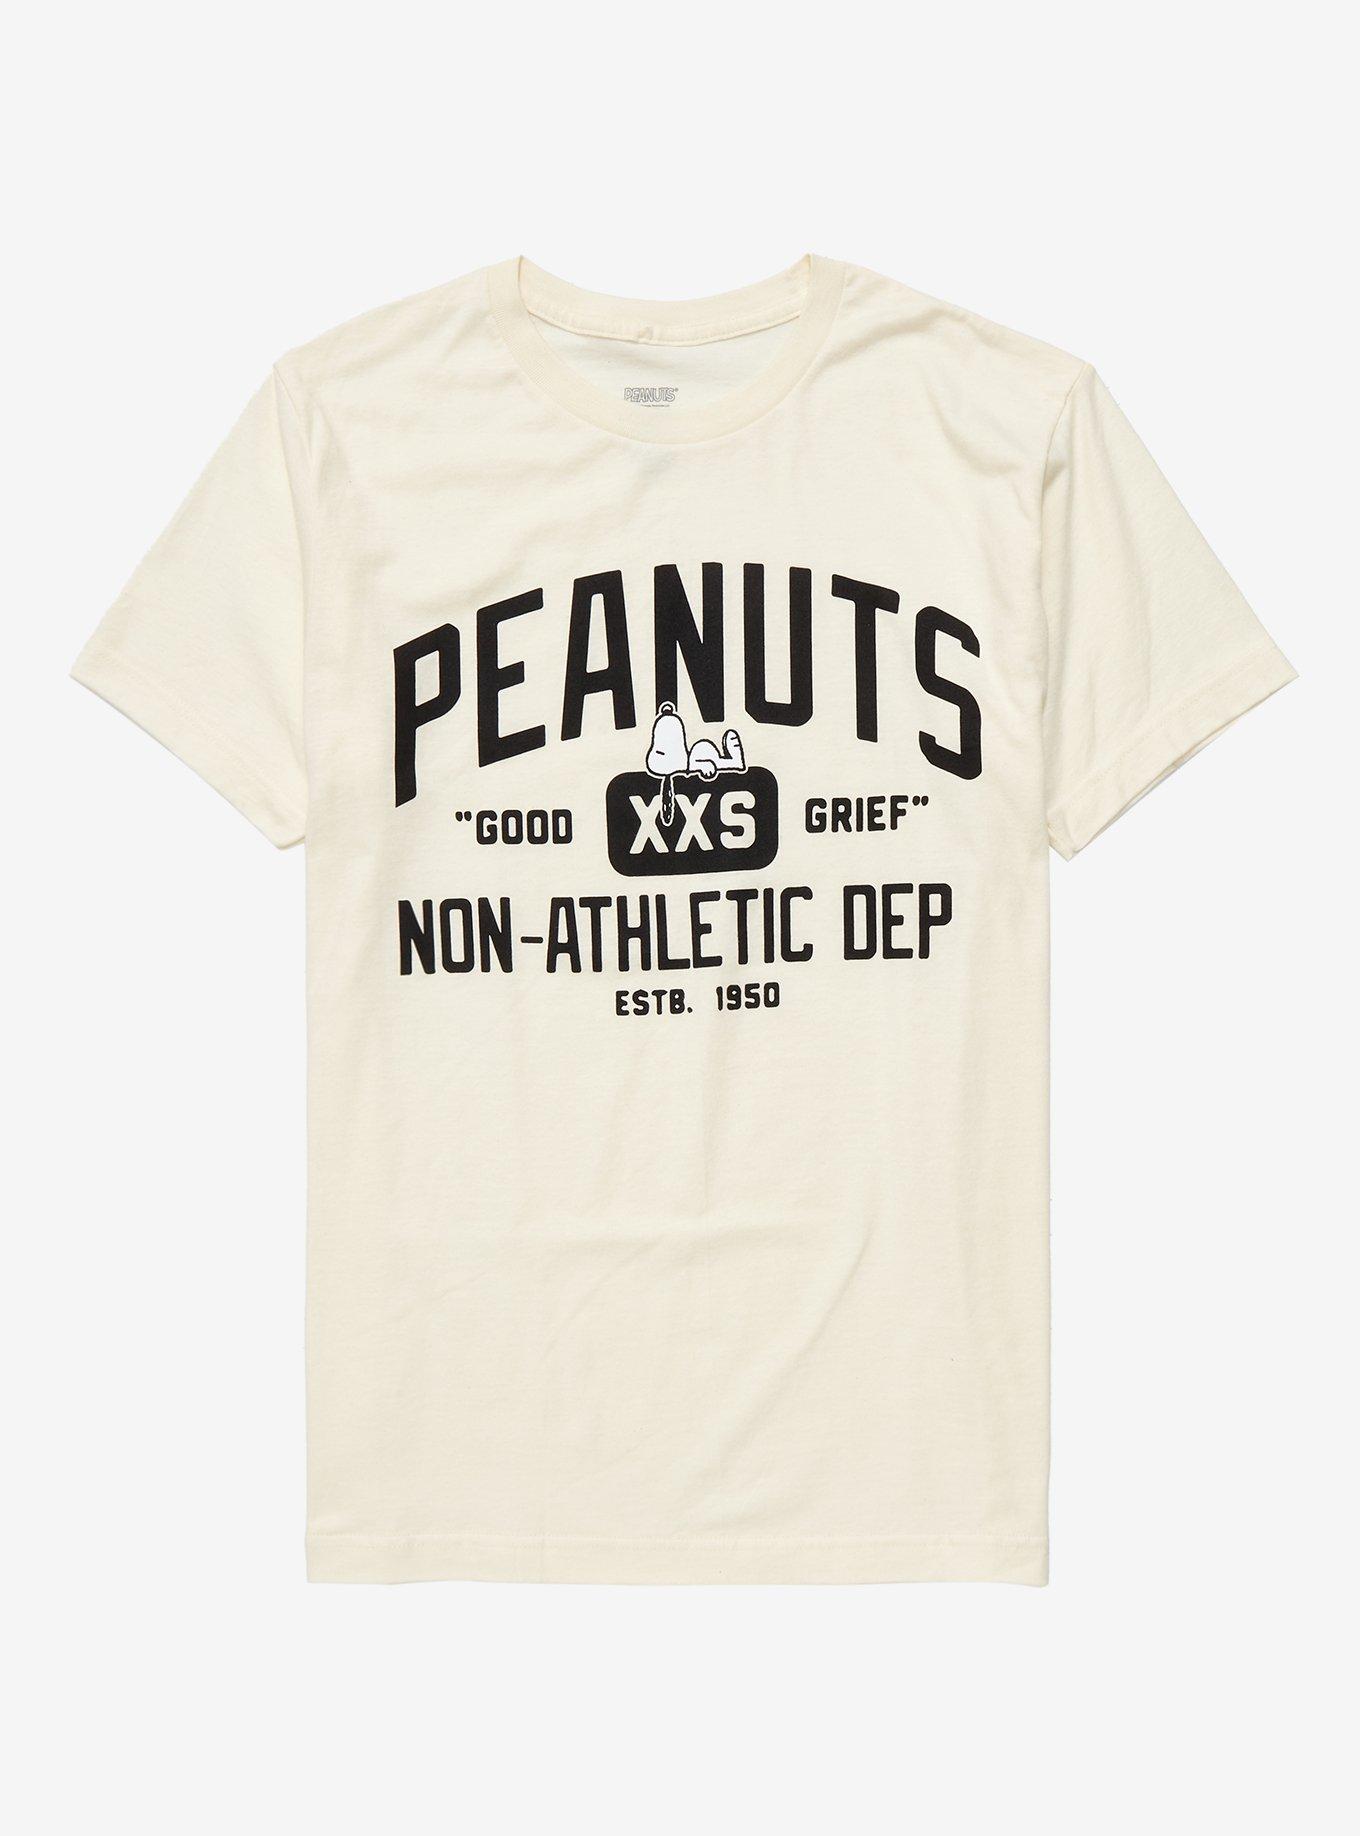 Peanuts Snoopy Non-Athletic Department - BoxLunch T-Shirt | Exclusive BoxLunch